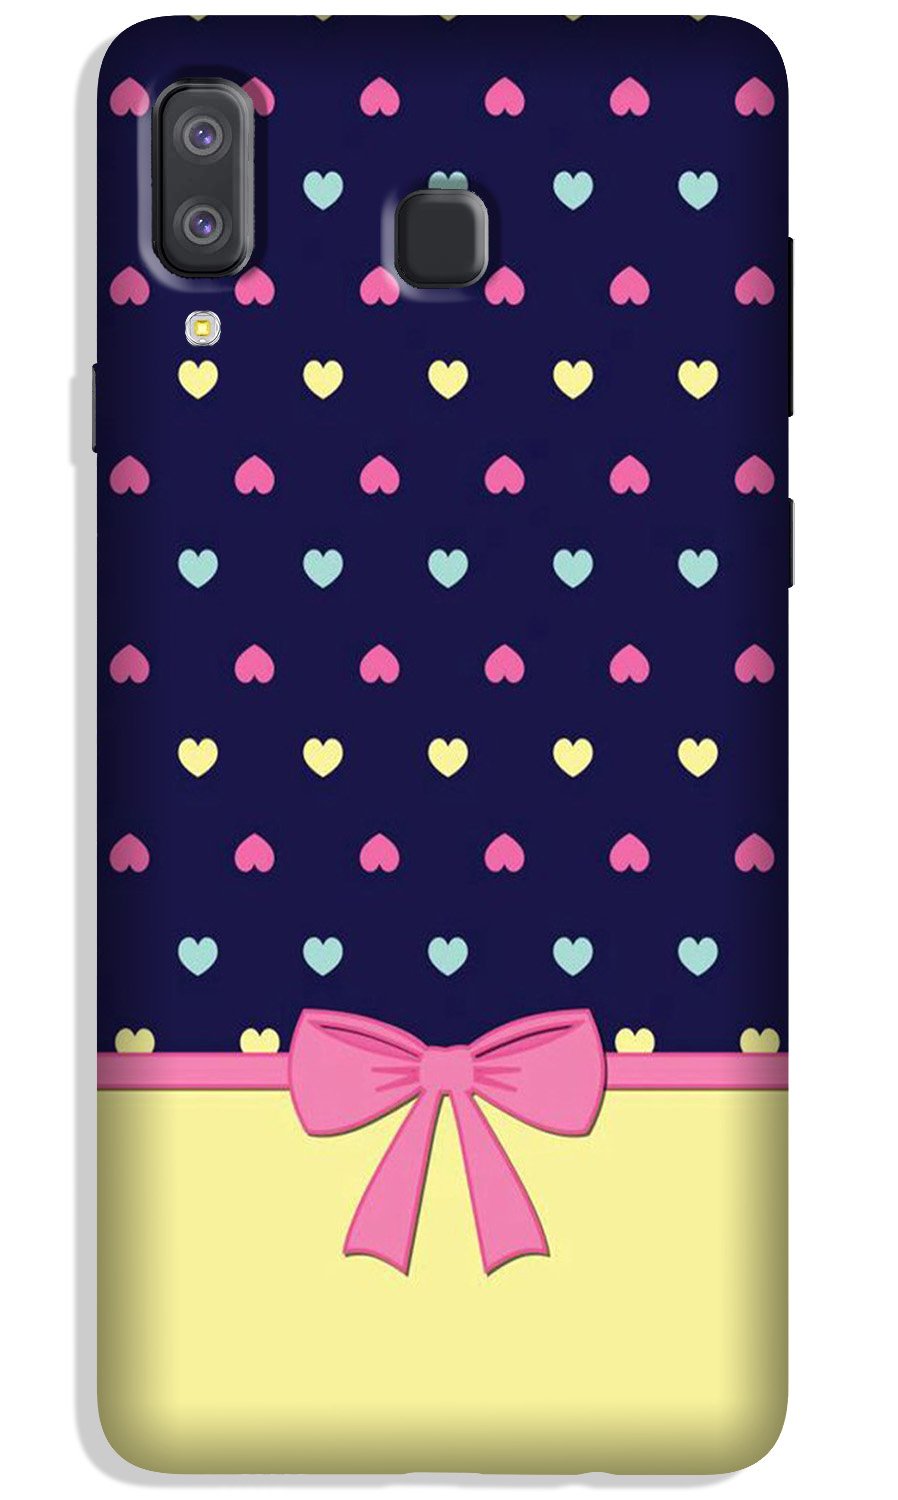 Gift Wrap5 Case for Galaxy A8 Star